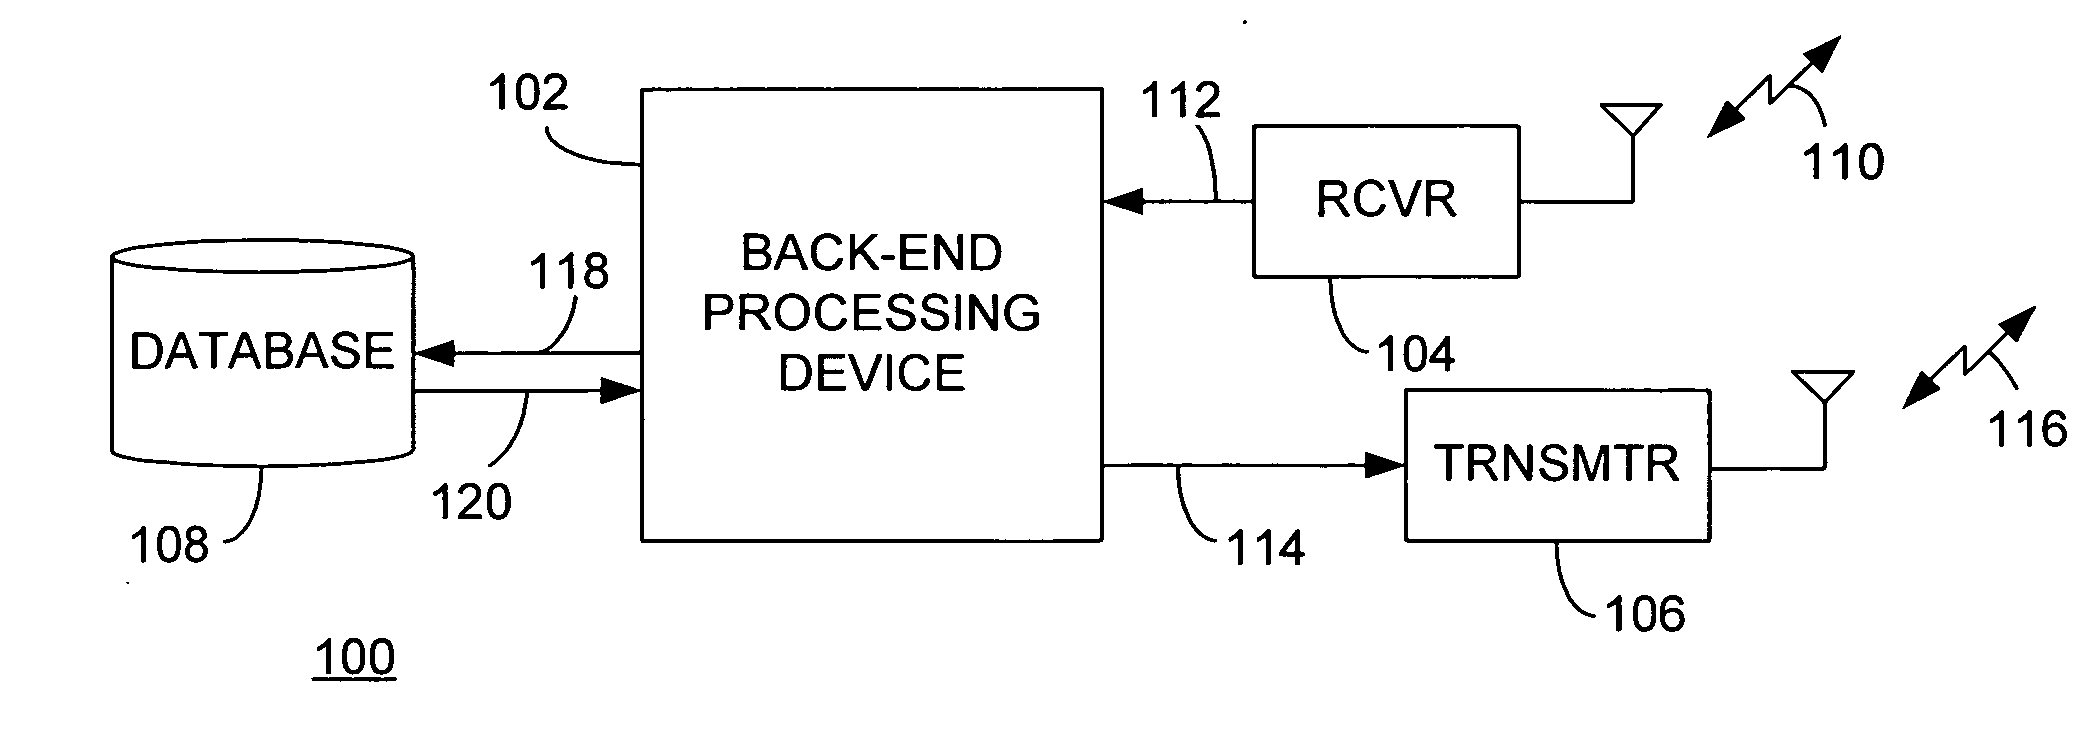 Predictive fault determination for a non-stationary device